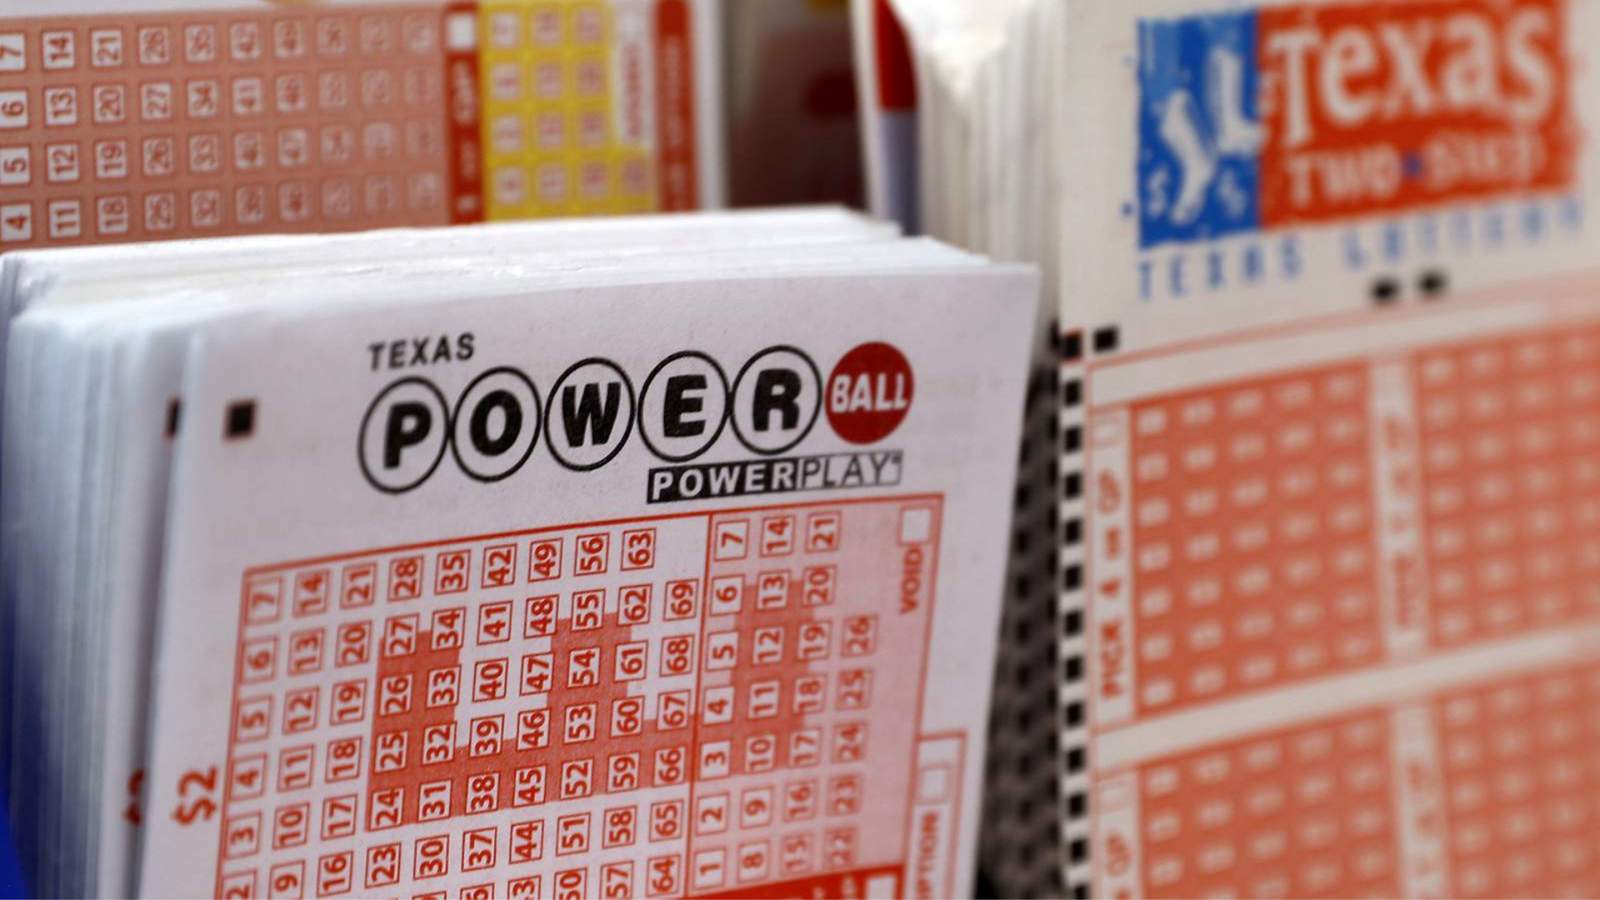 Next up: $730M Powerball prize after no Mega Millions winner